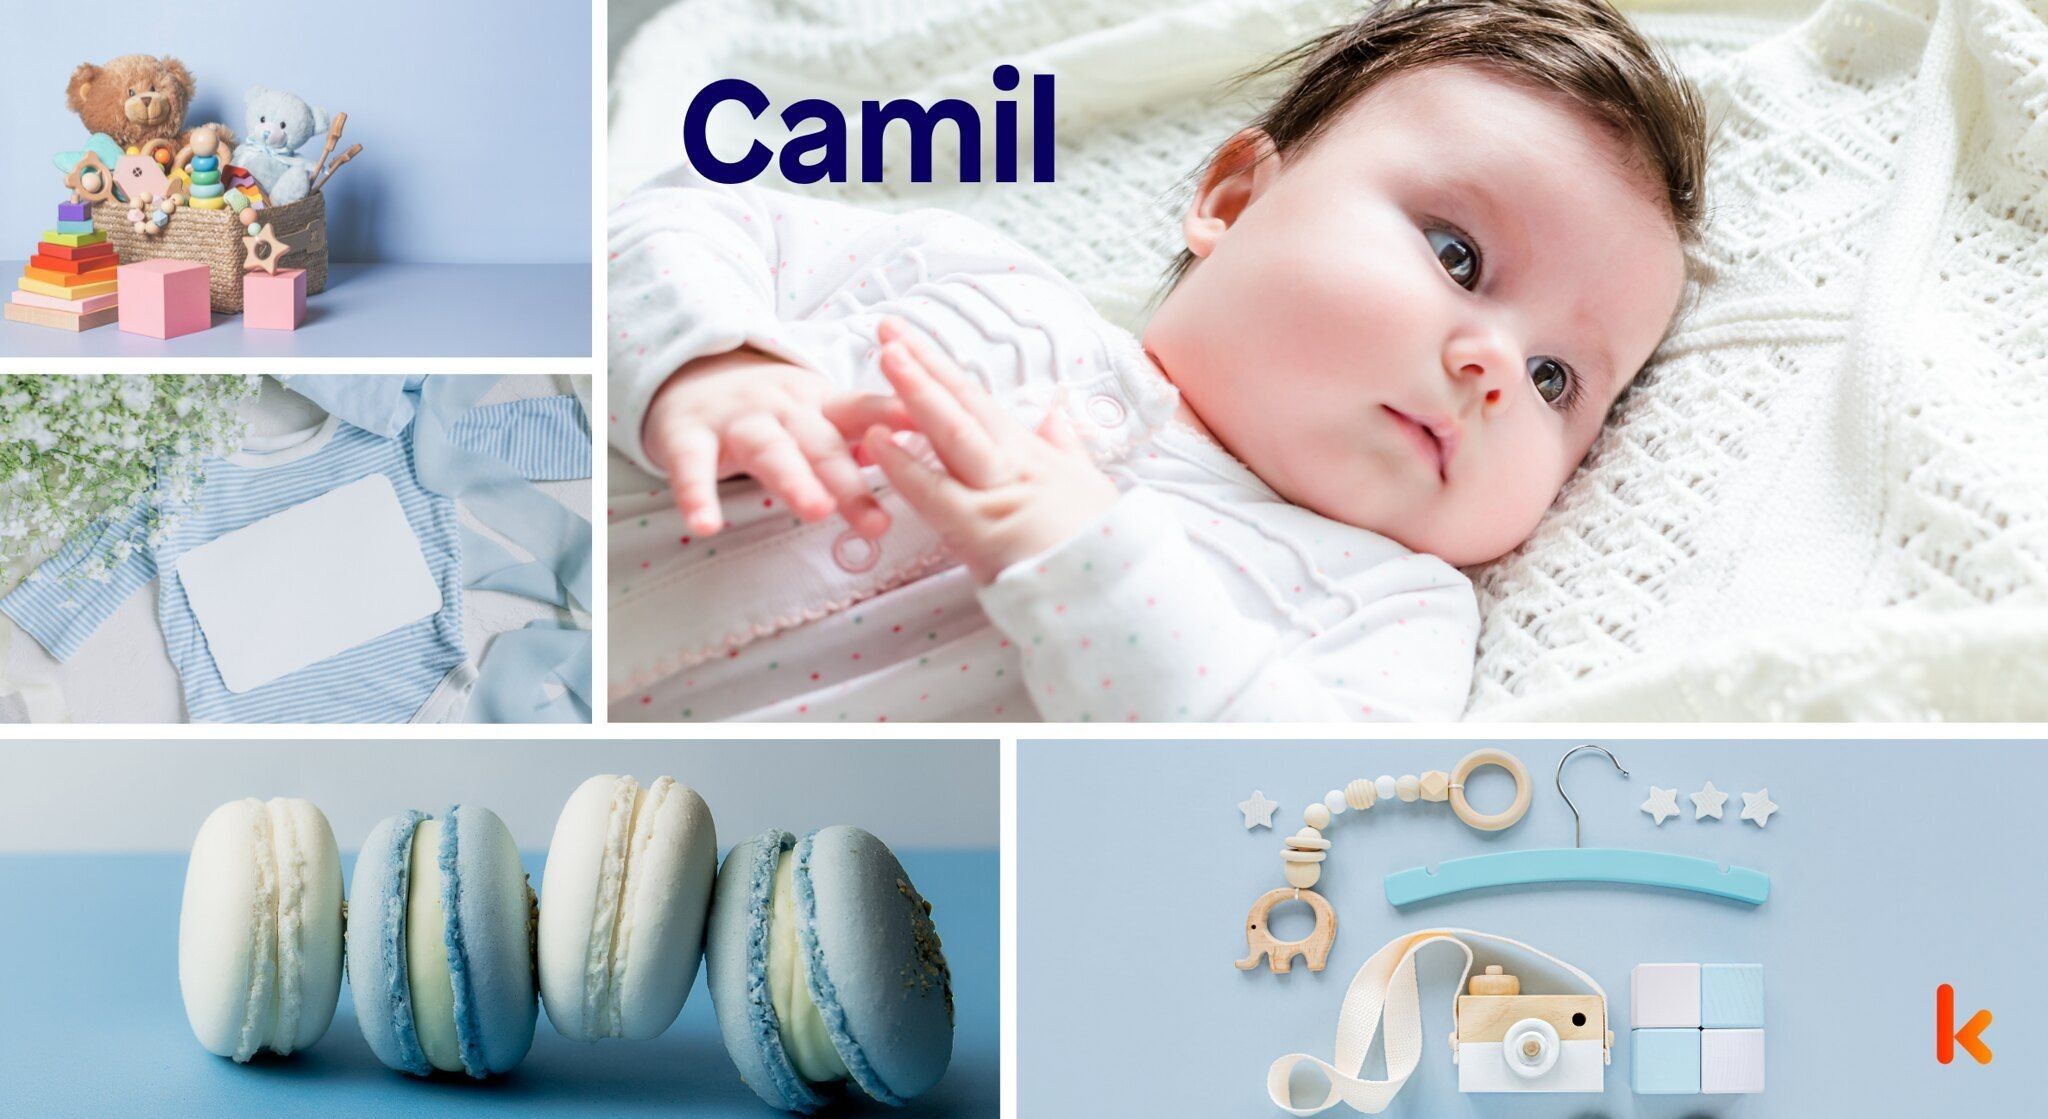 Meaning of the name Camil